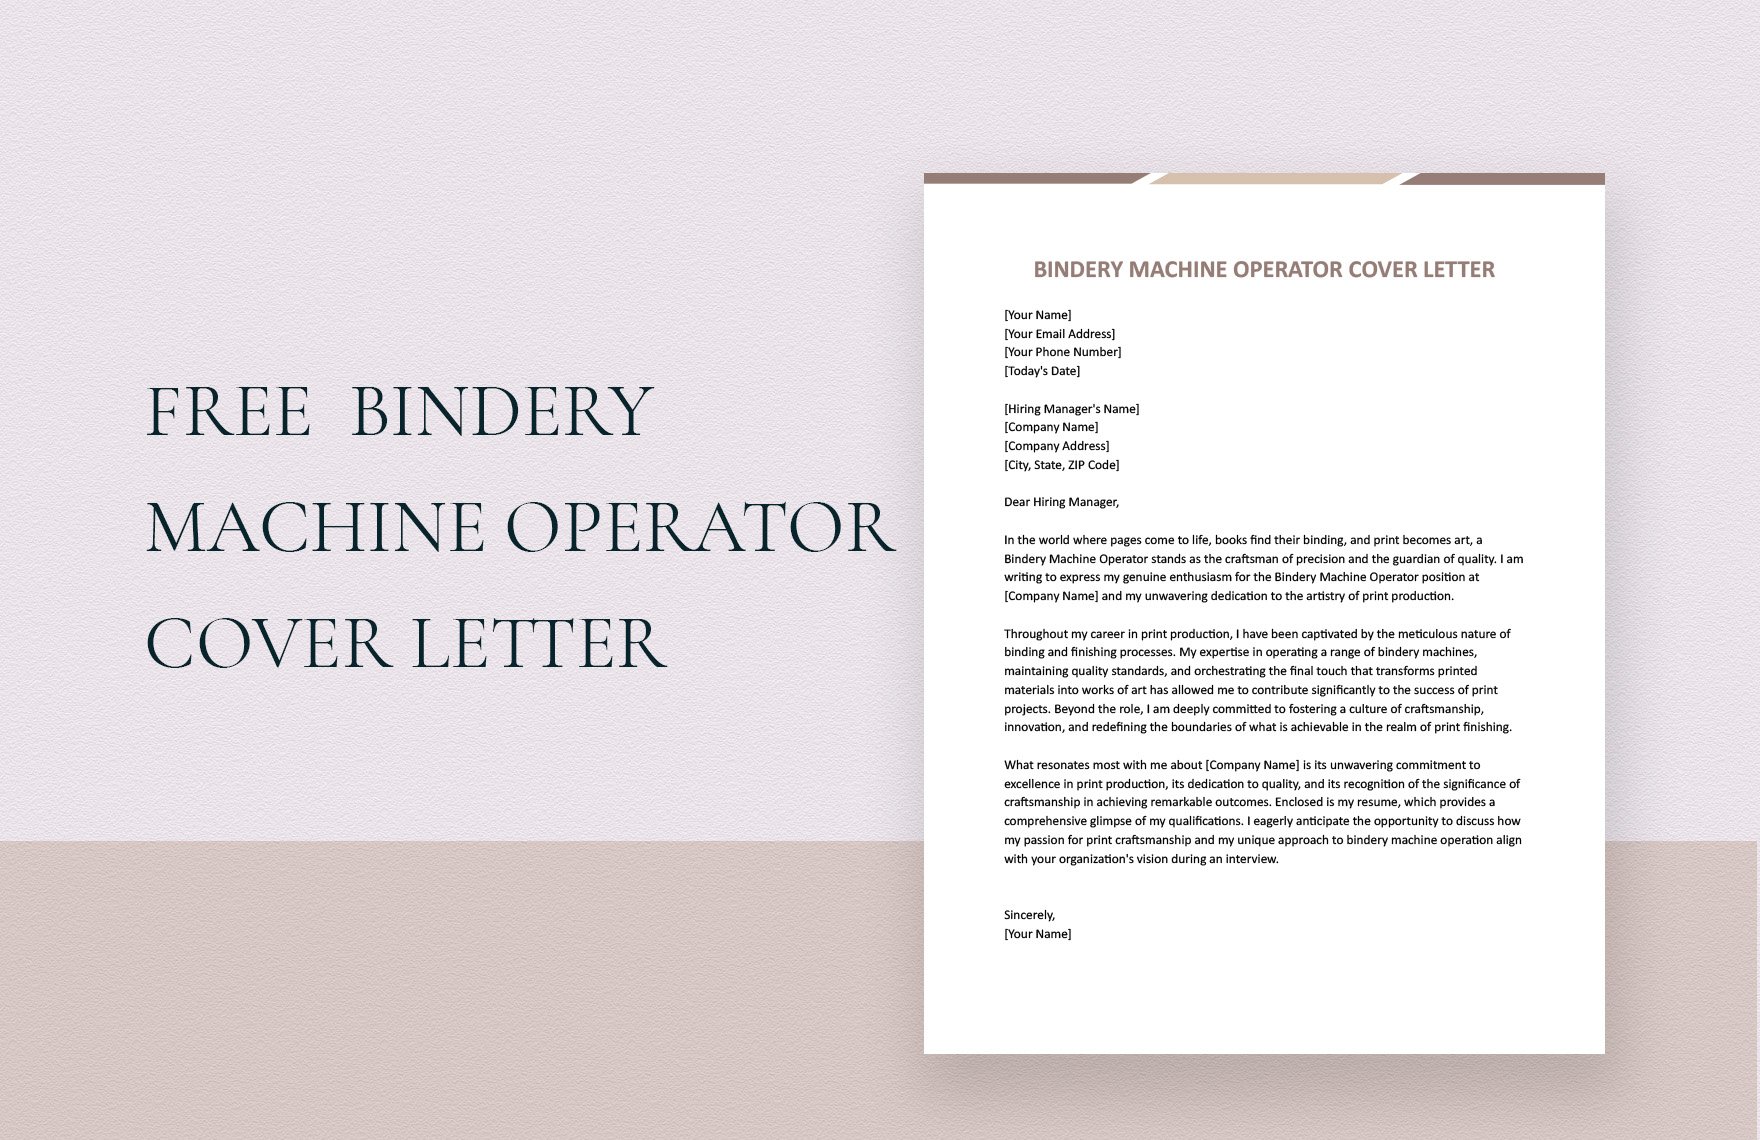 Bindery Machine Operator Cover Letter